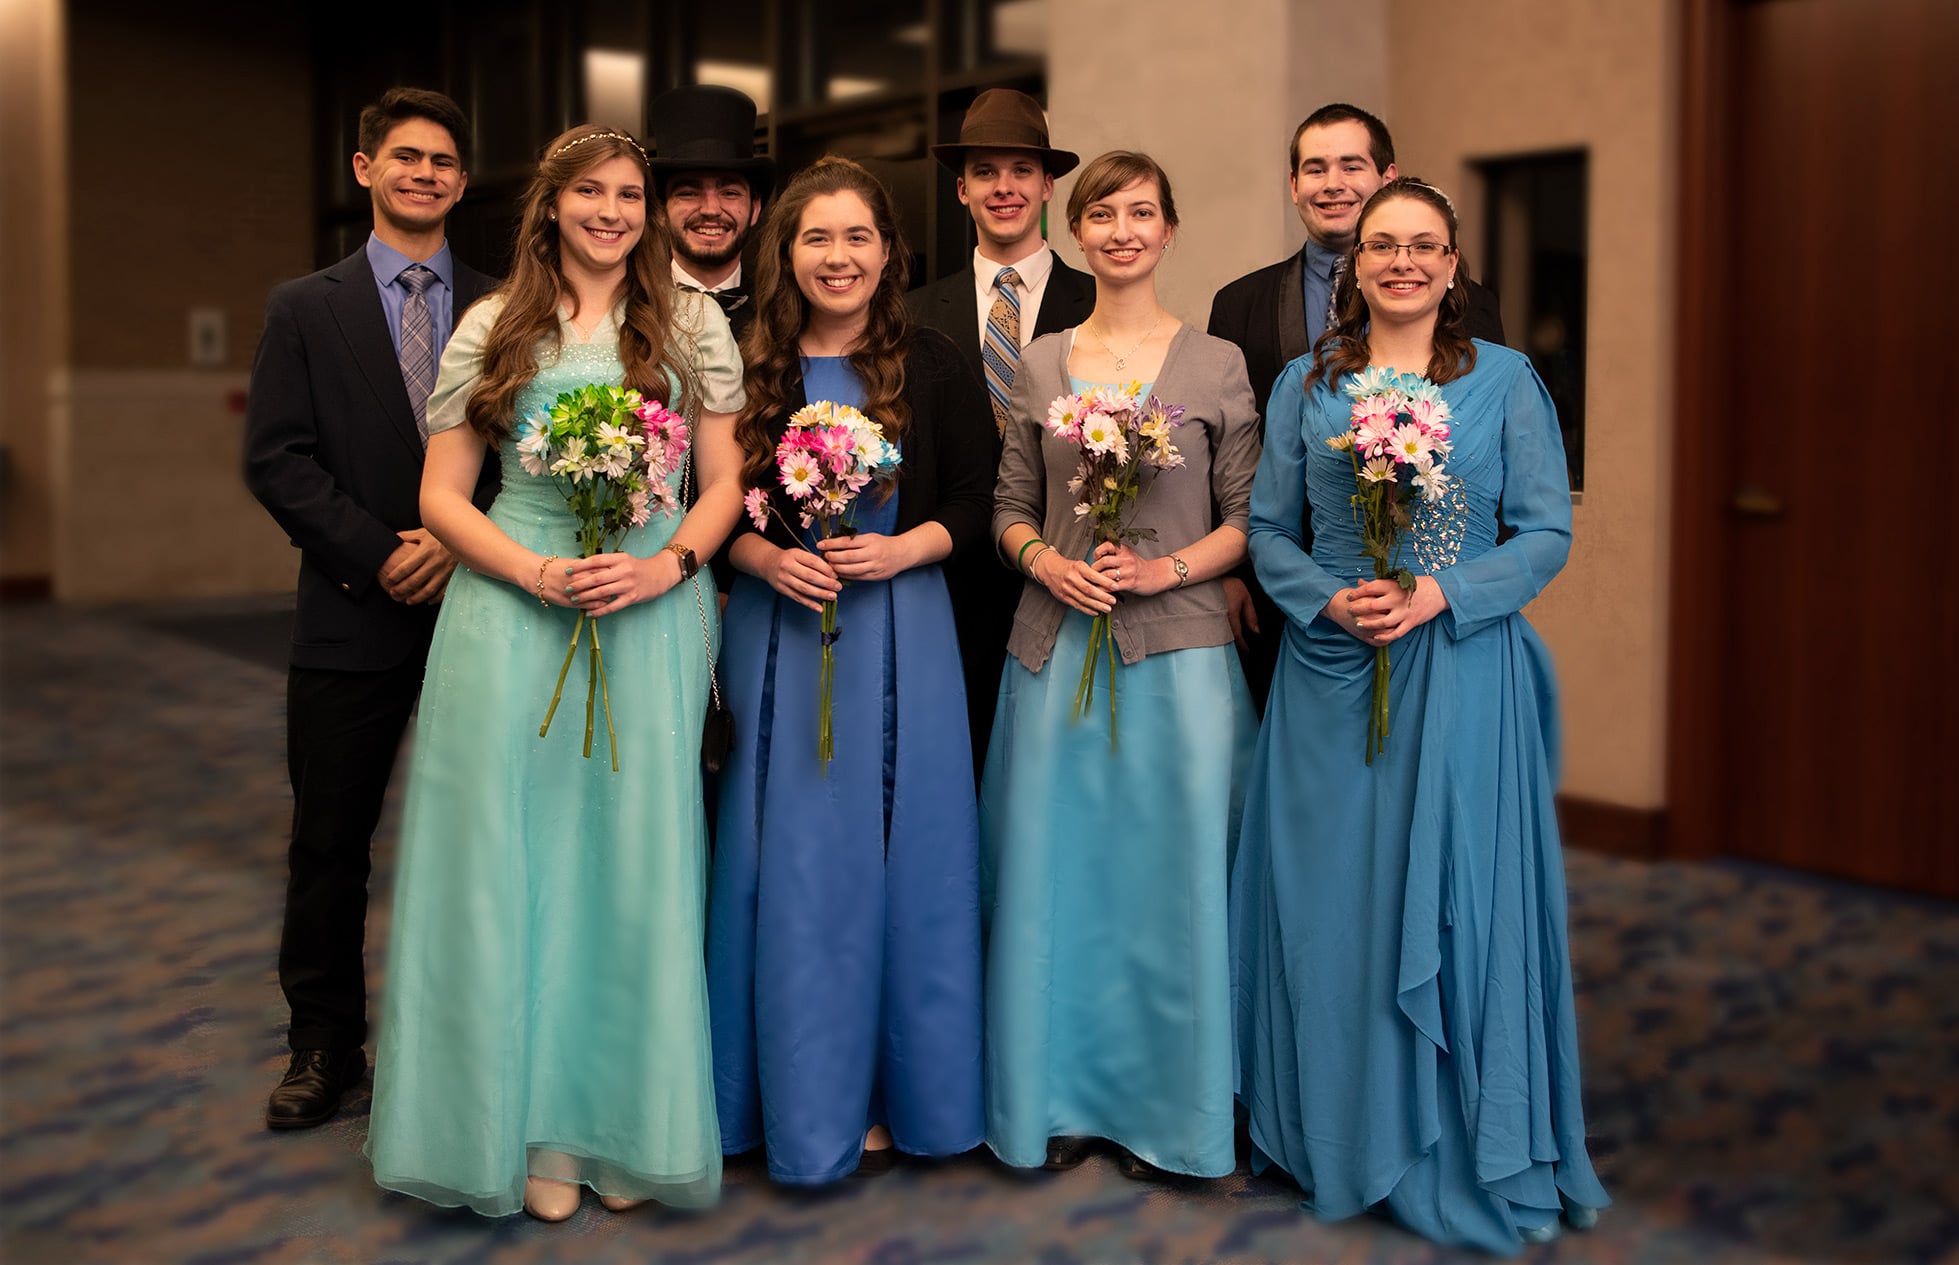 A group of four girls in blue dresses pose for a picture with four guys